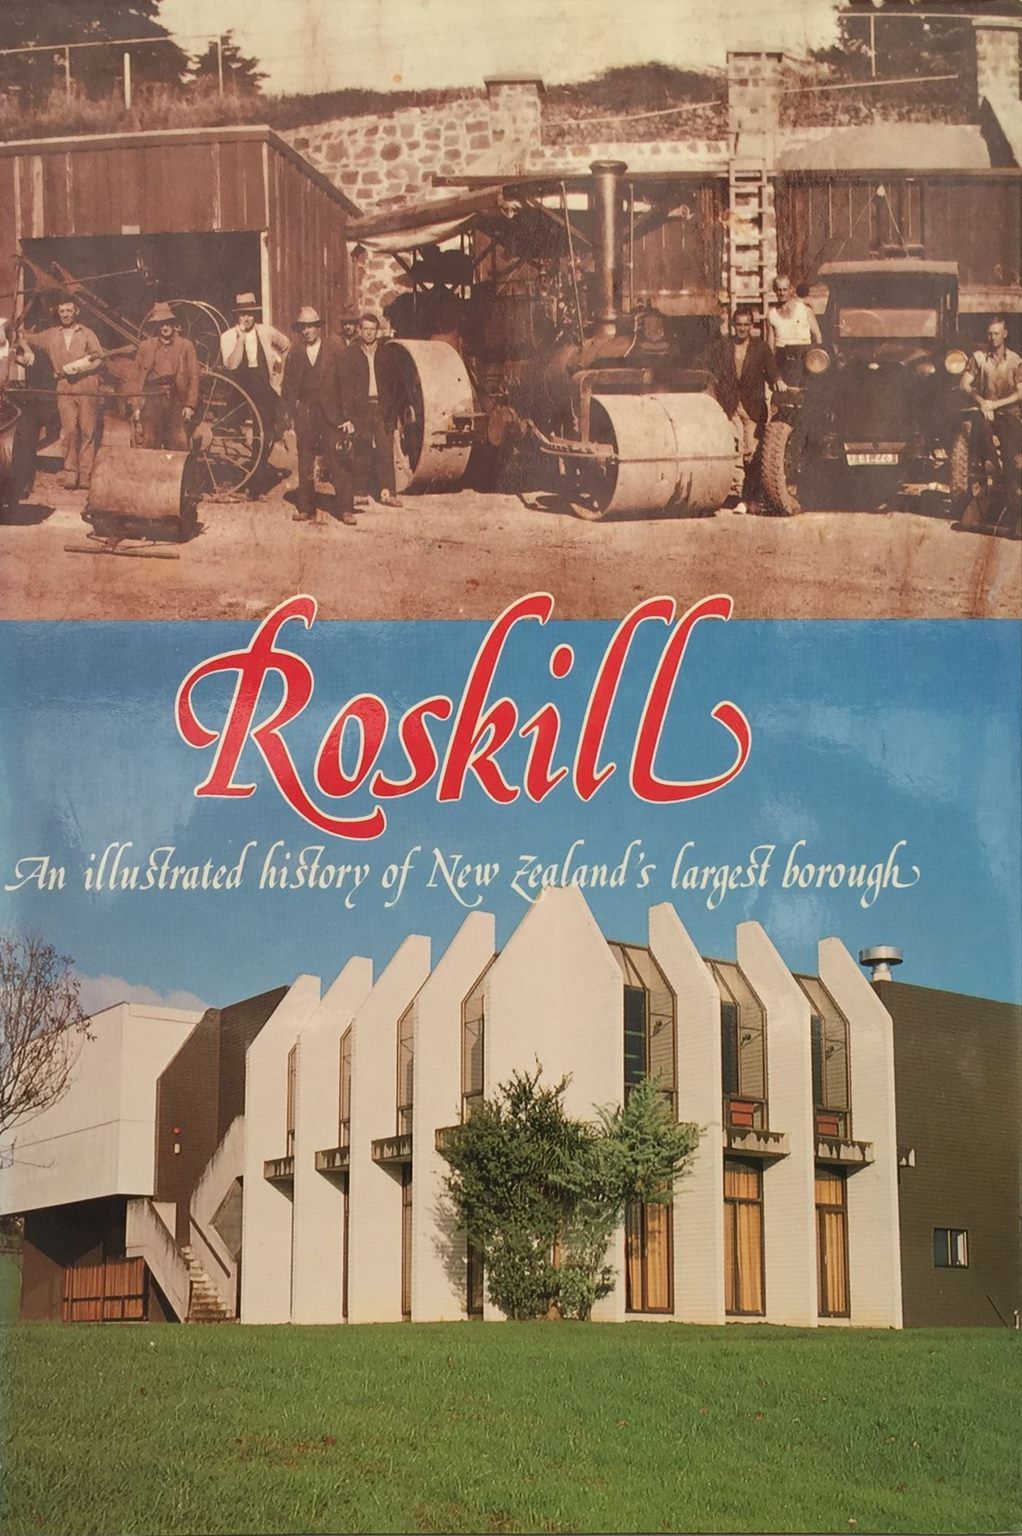 ROSKILL: An Illustrated History of New Zealand's Largest Borough